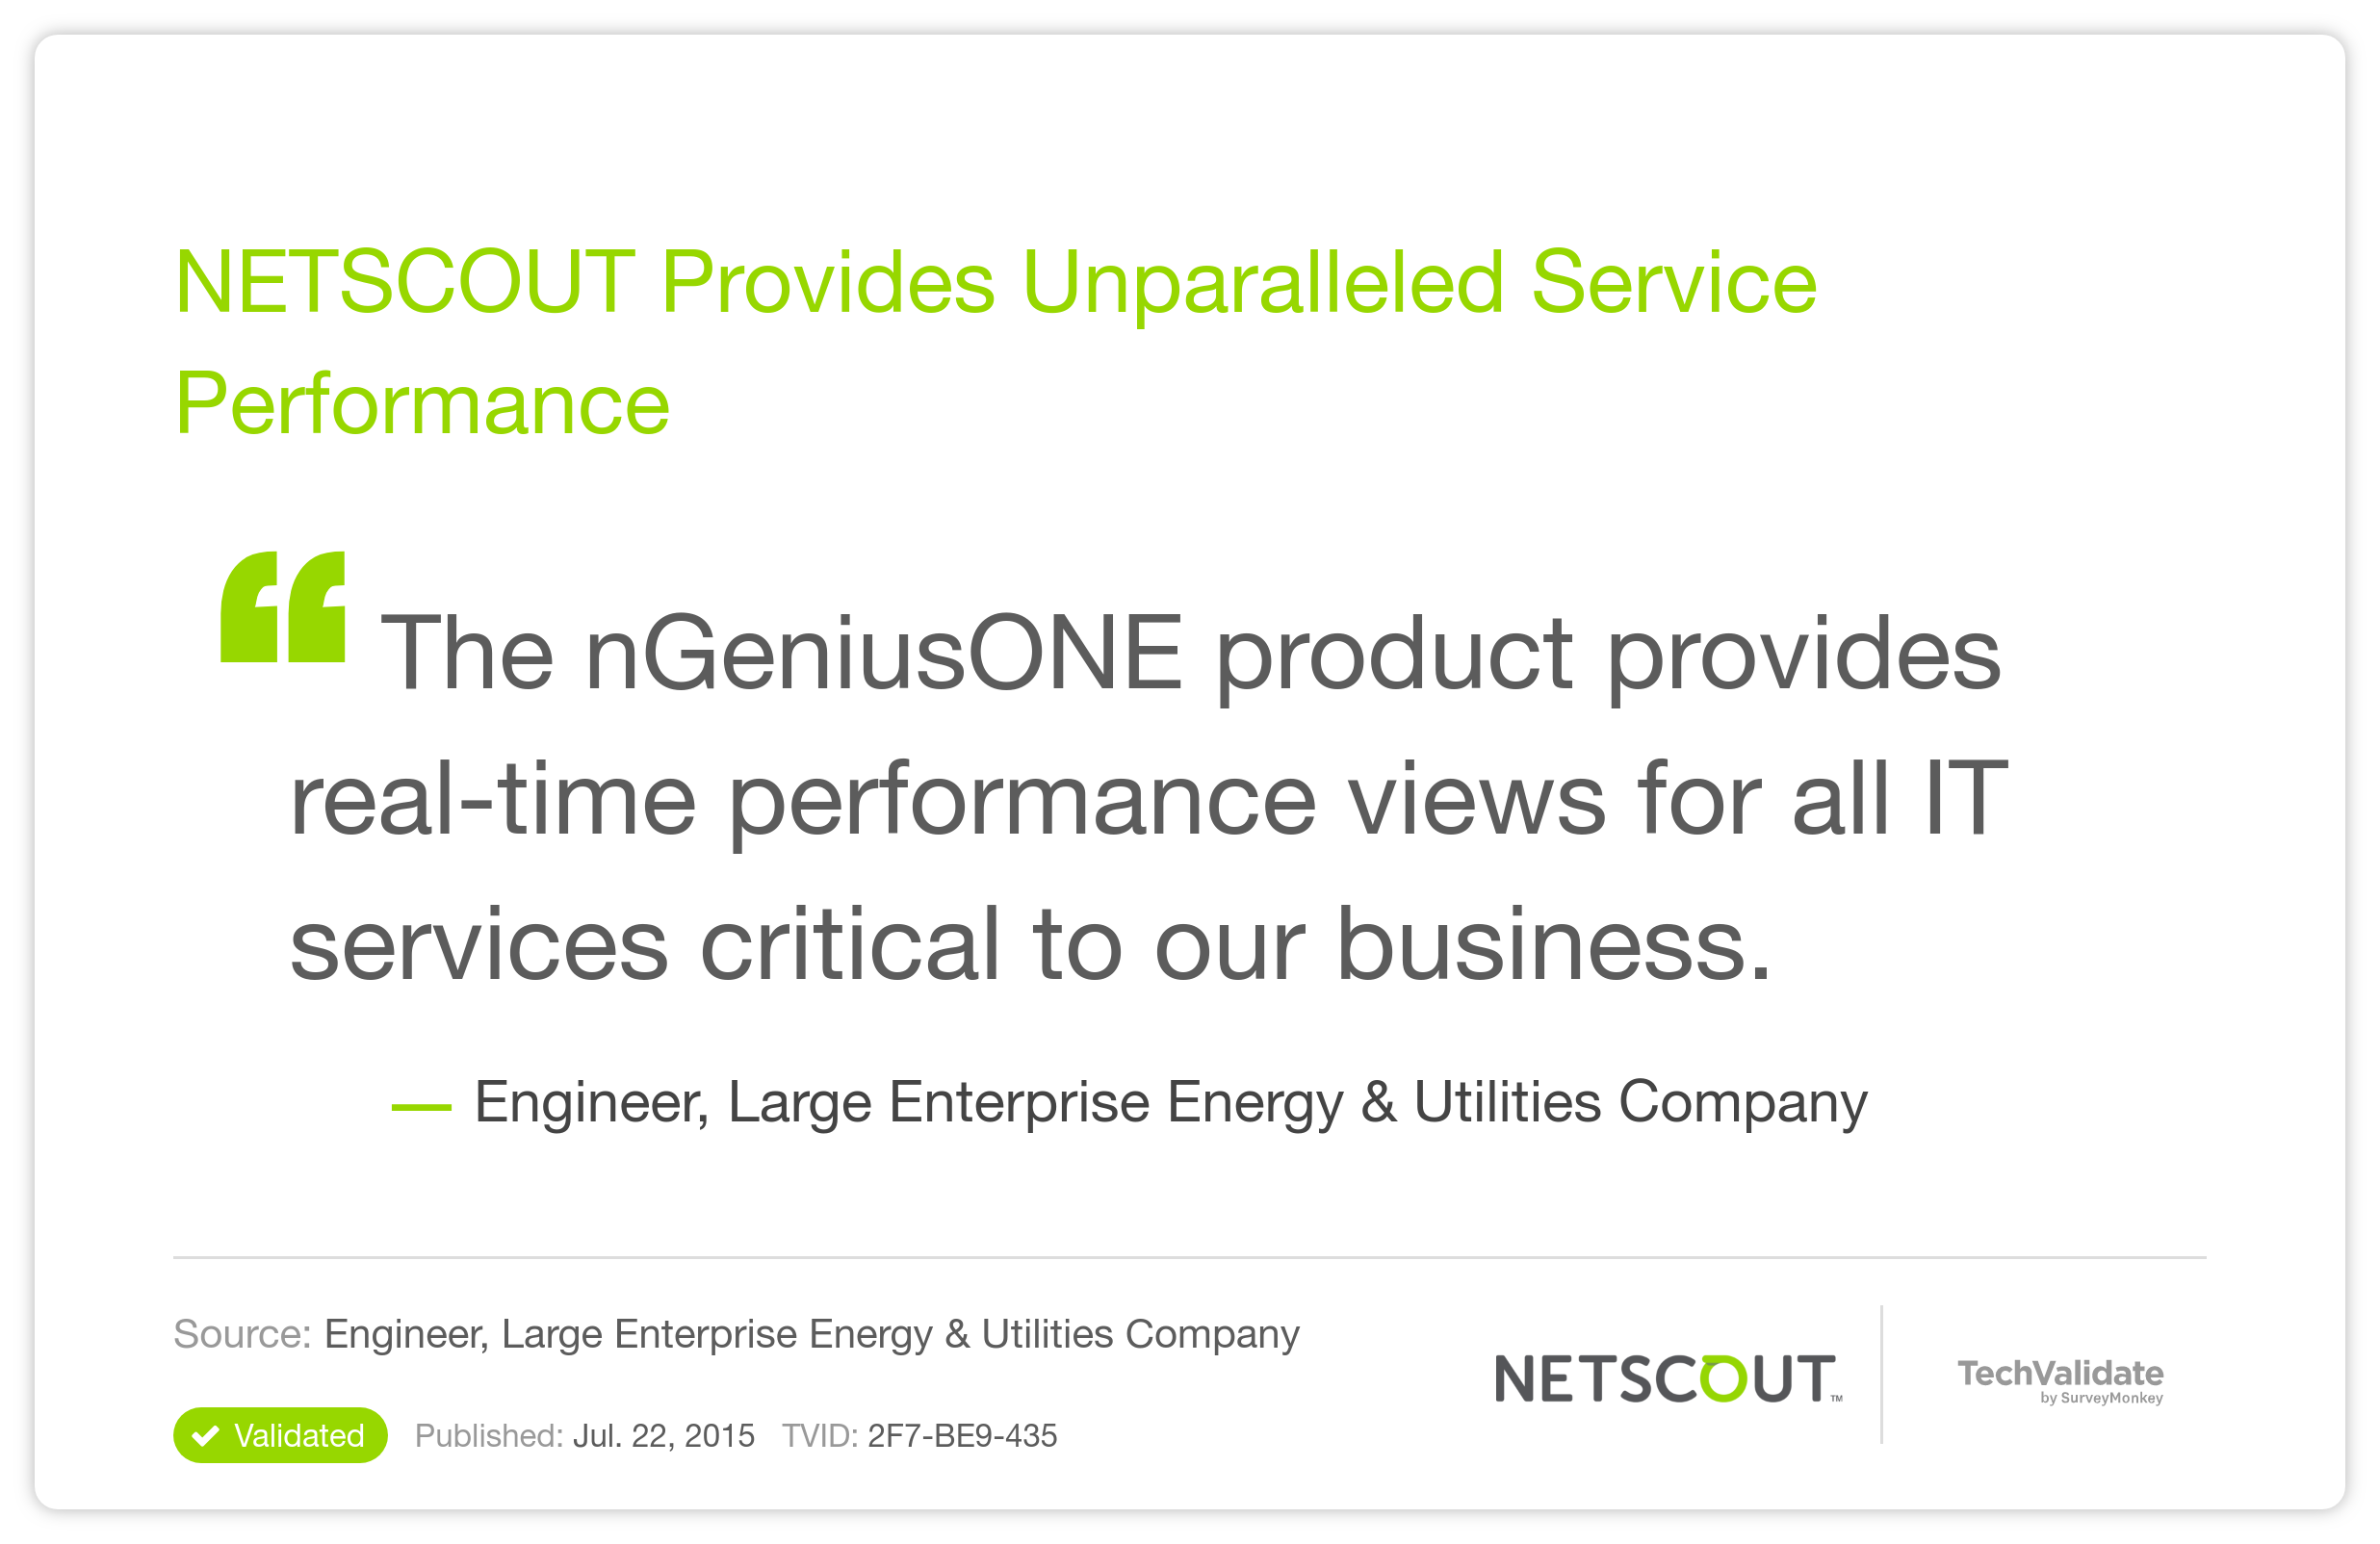 NETSCOUT Provides Unparalleled Service Performance